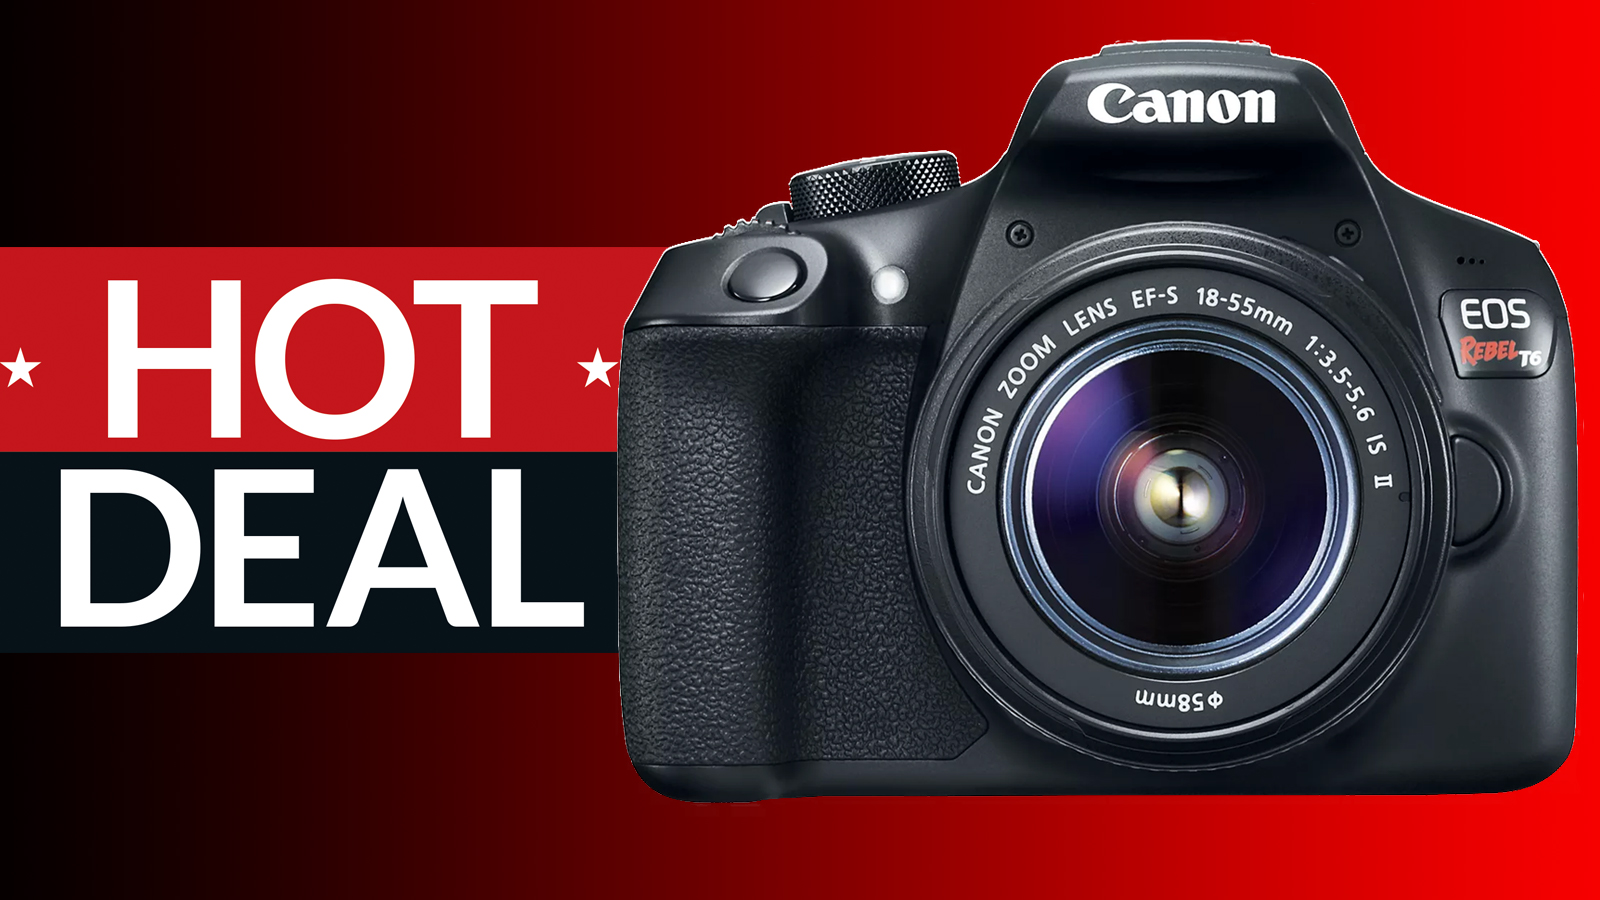 canon eos rebel t3i target